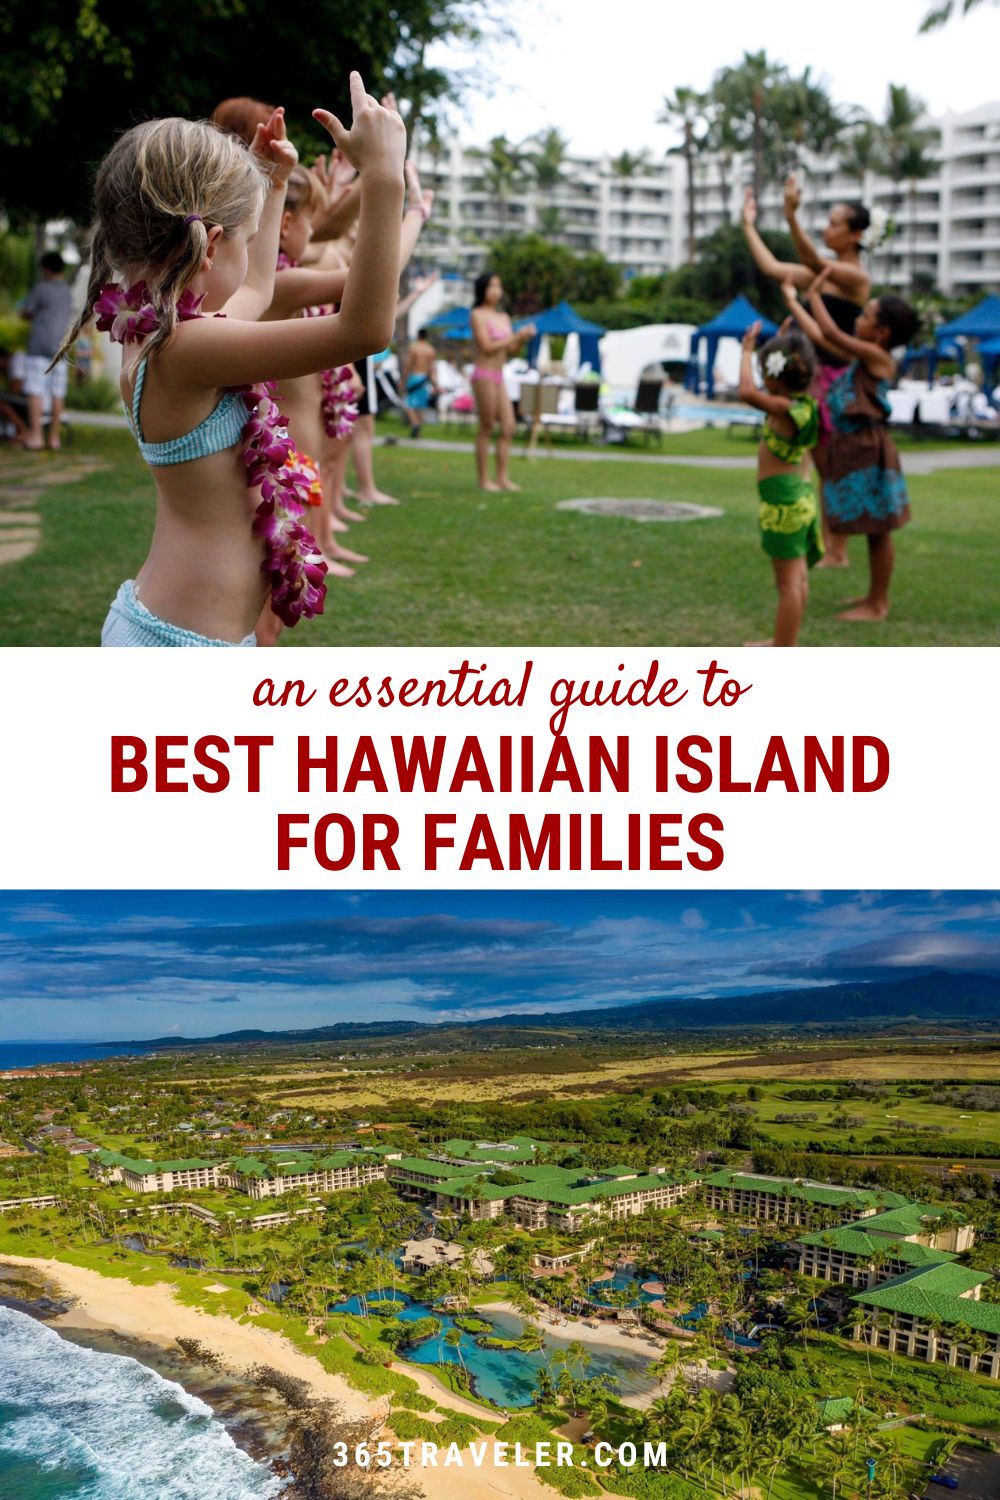 Best Hawaiian Island for Families: All the Info so You Can Make the Best Choice in 2023